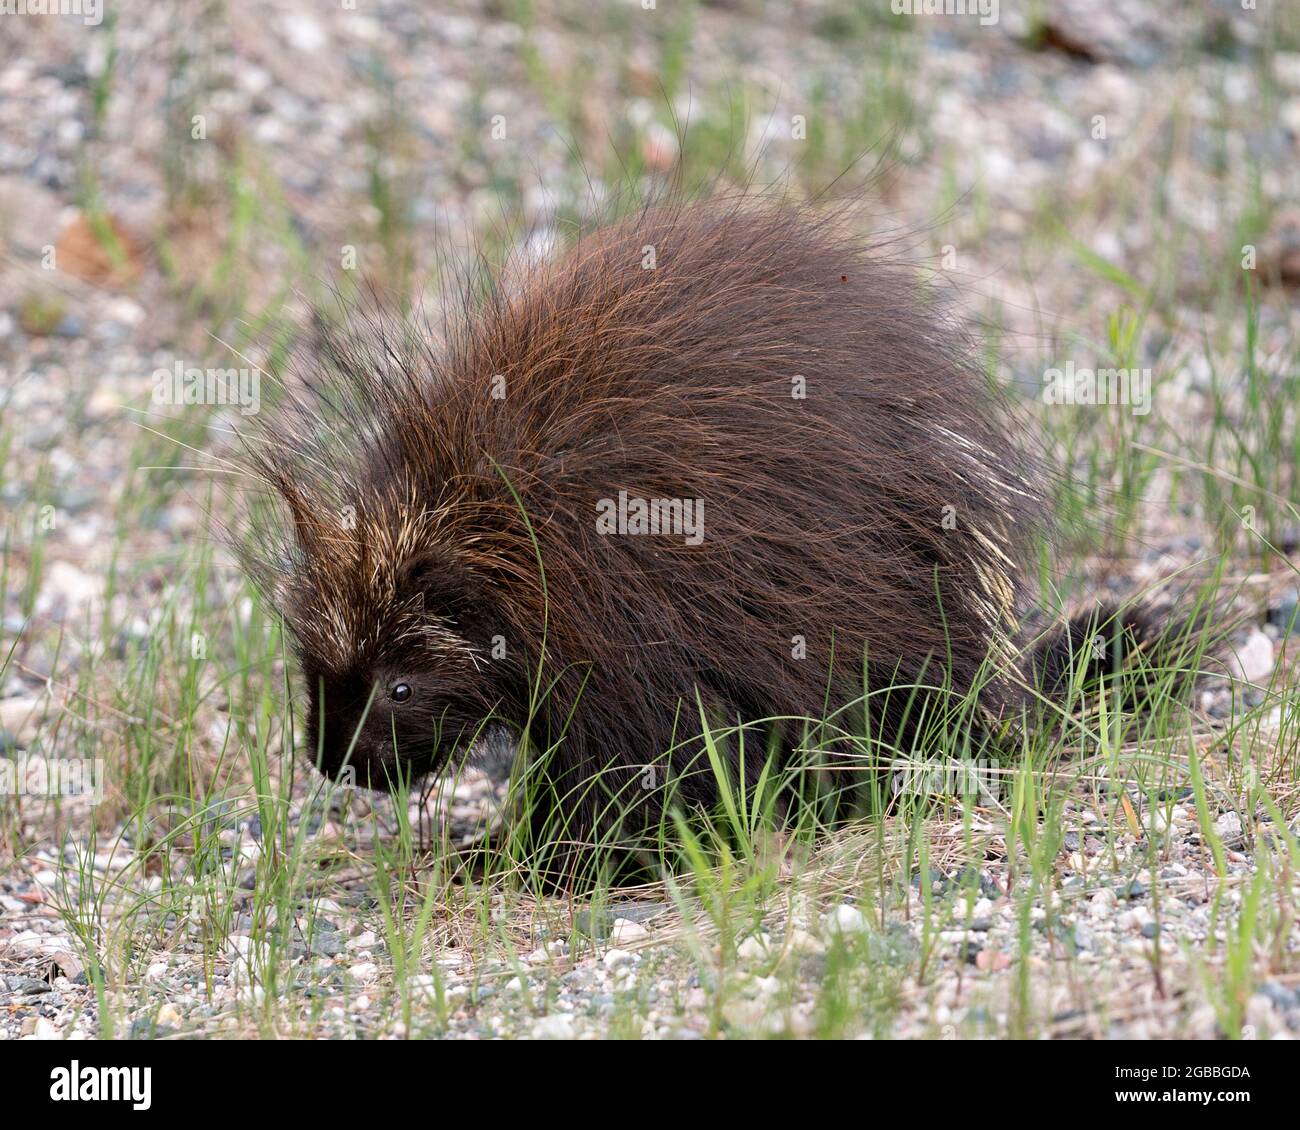 Porcupine animal close-up profile view walking on gravel on the side of road with foliage foreground and gravel and foliage background. Stock Photo